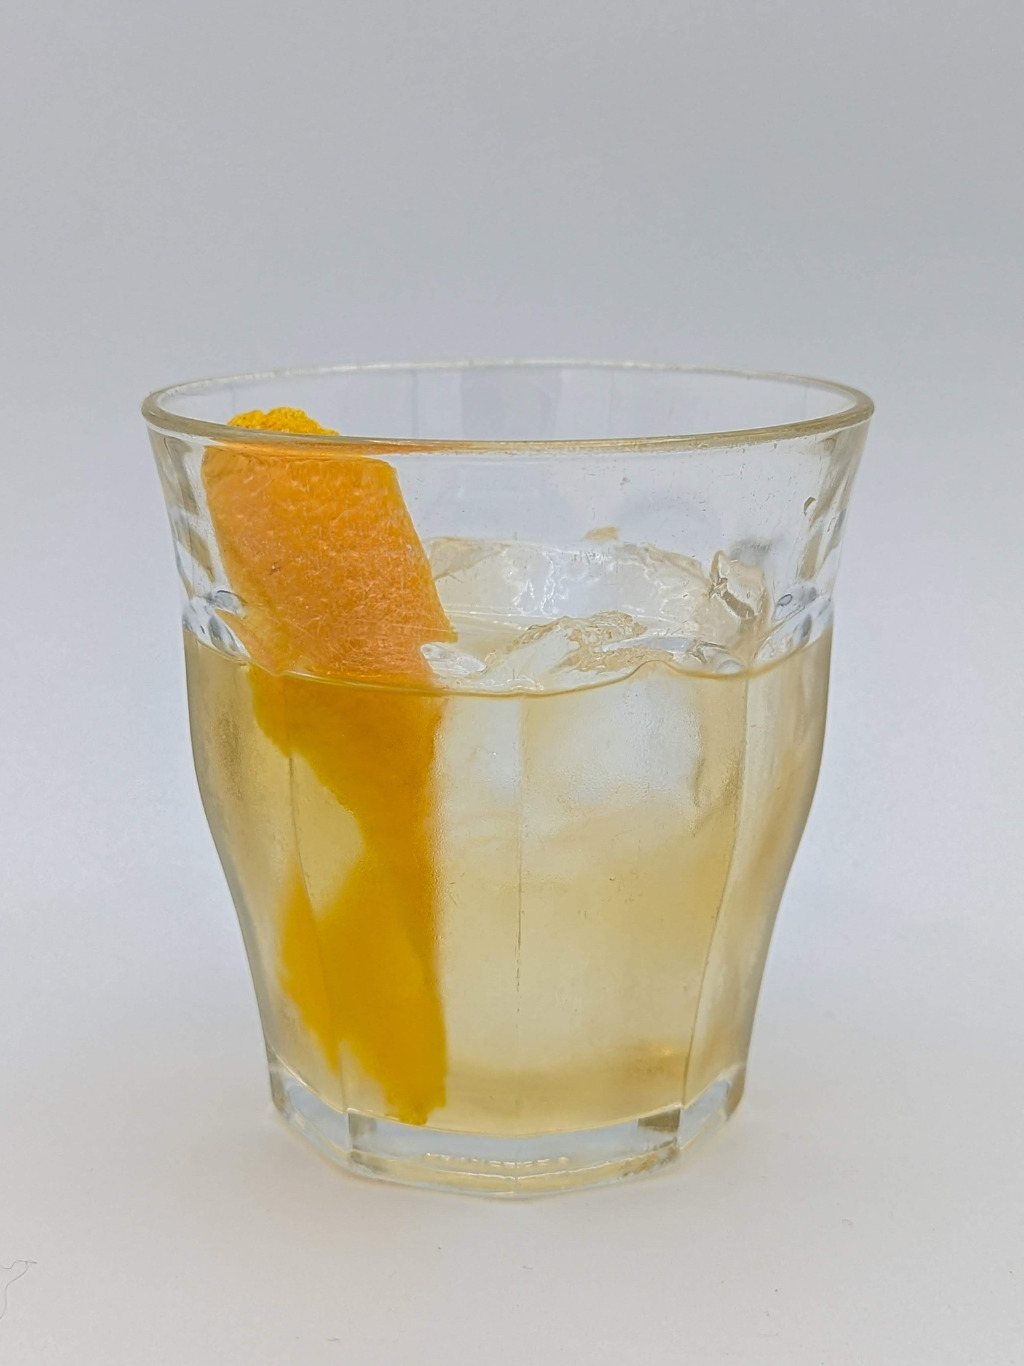 Straw colored liquid in an old fashioned glass filled with ice and with a orange peel garnish